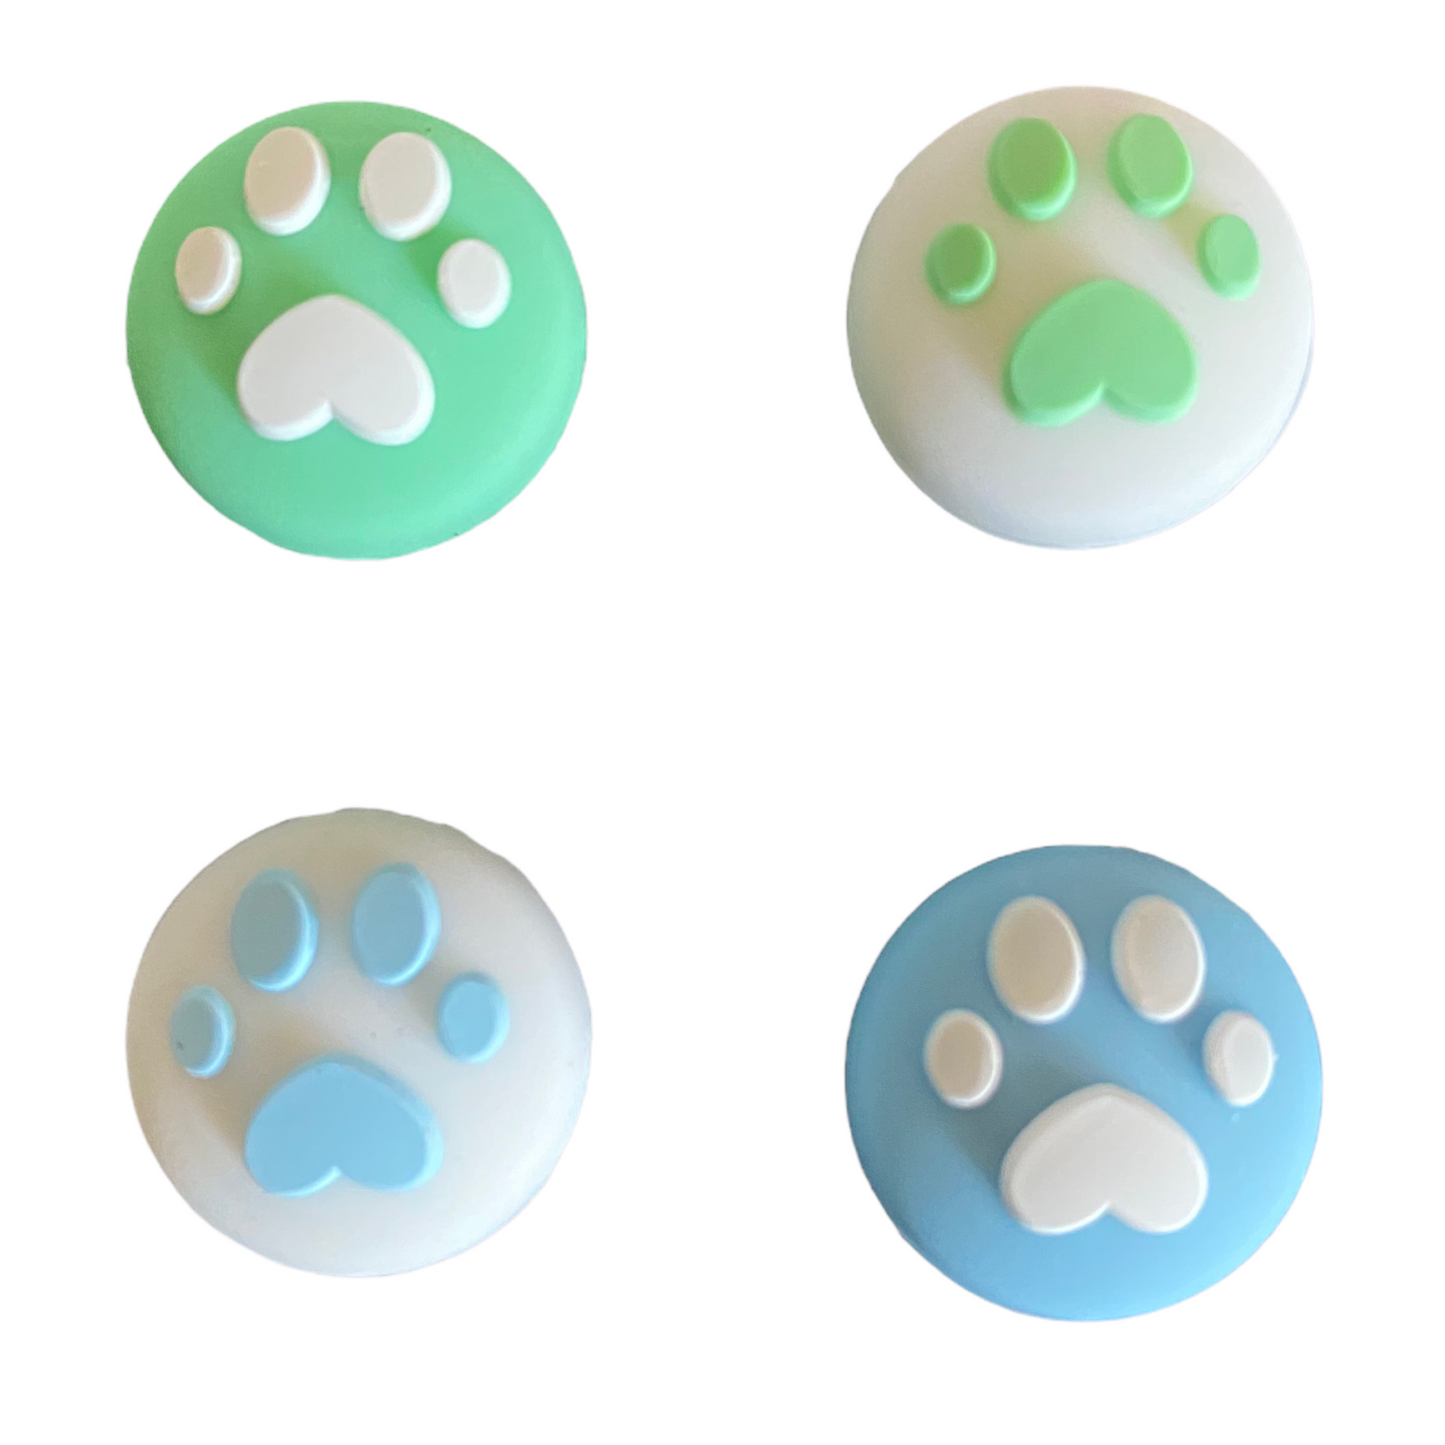 JenDore Green Blue Paw 4Pcs Silicone Thumb Grip Caps for Nintendo Switch